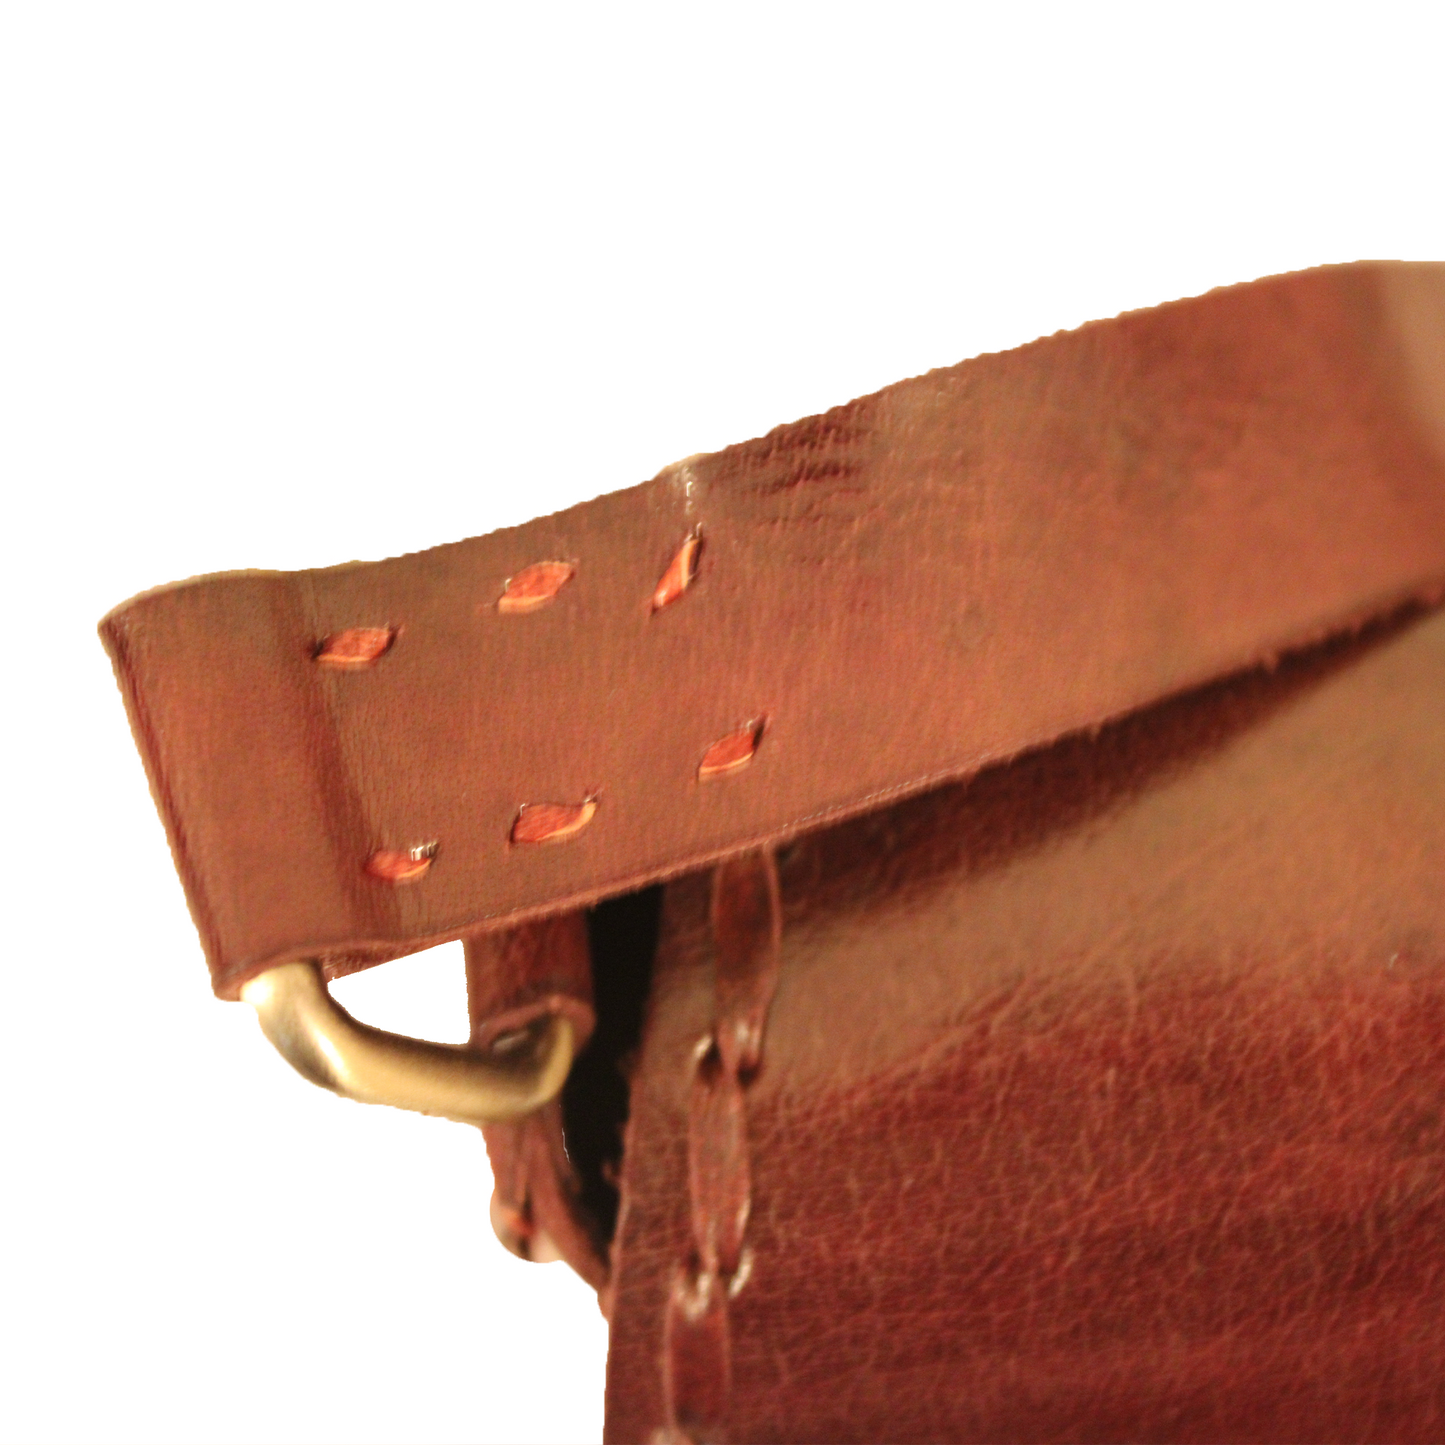 Woody Brown Hand embroidered Classic Saddle Sling Bag